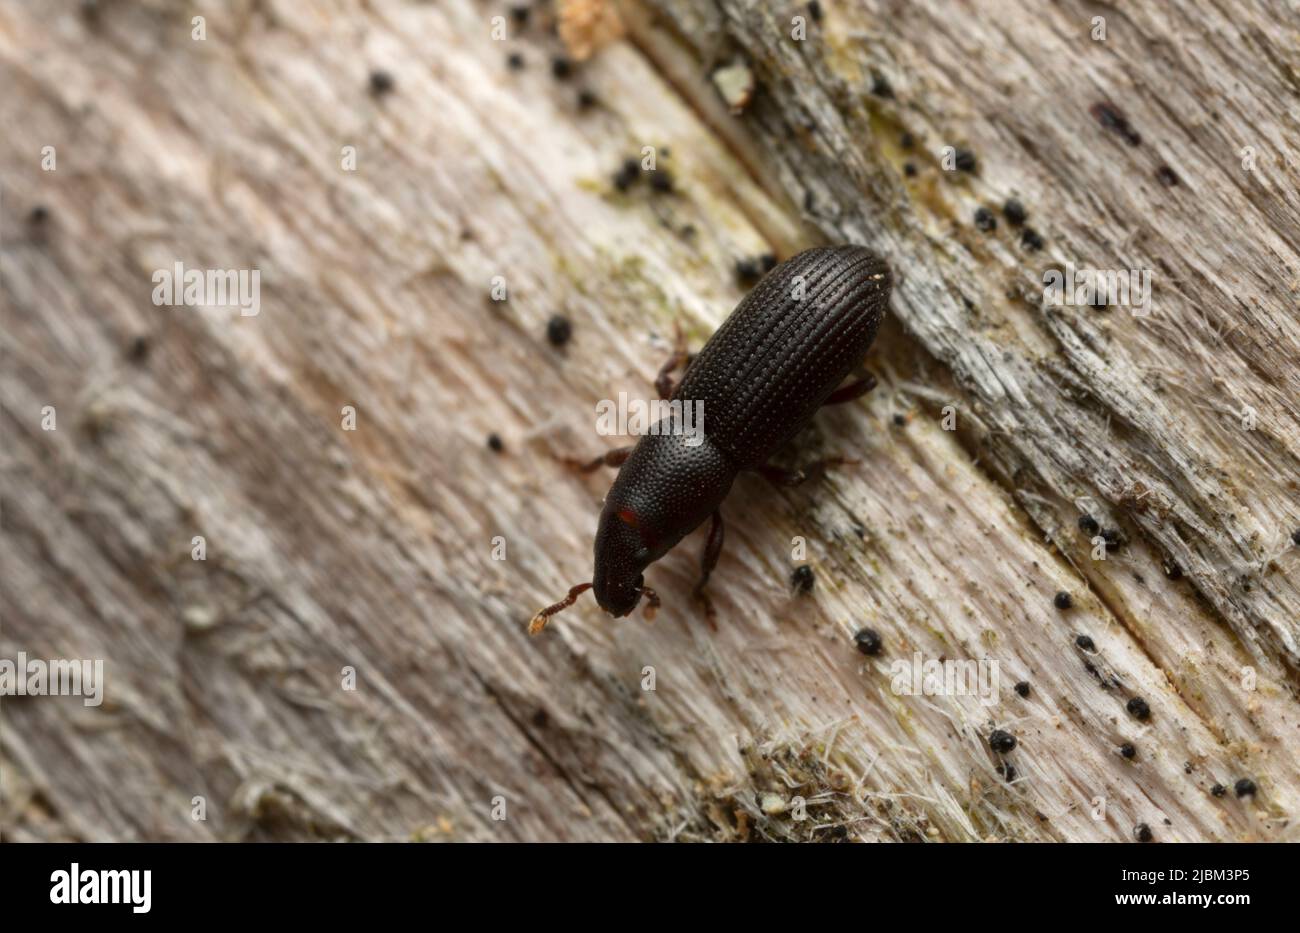 Rhyncolus weevil on wood, macro photo with high magnification Stock Photo